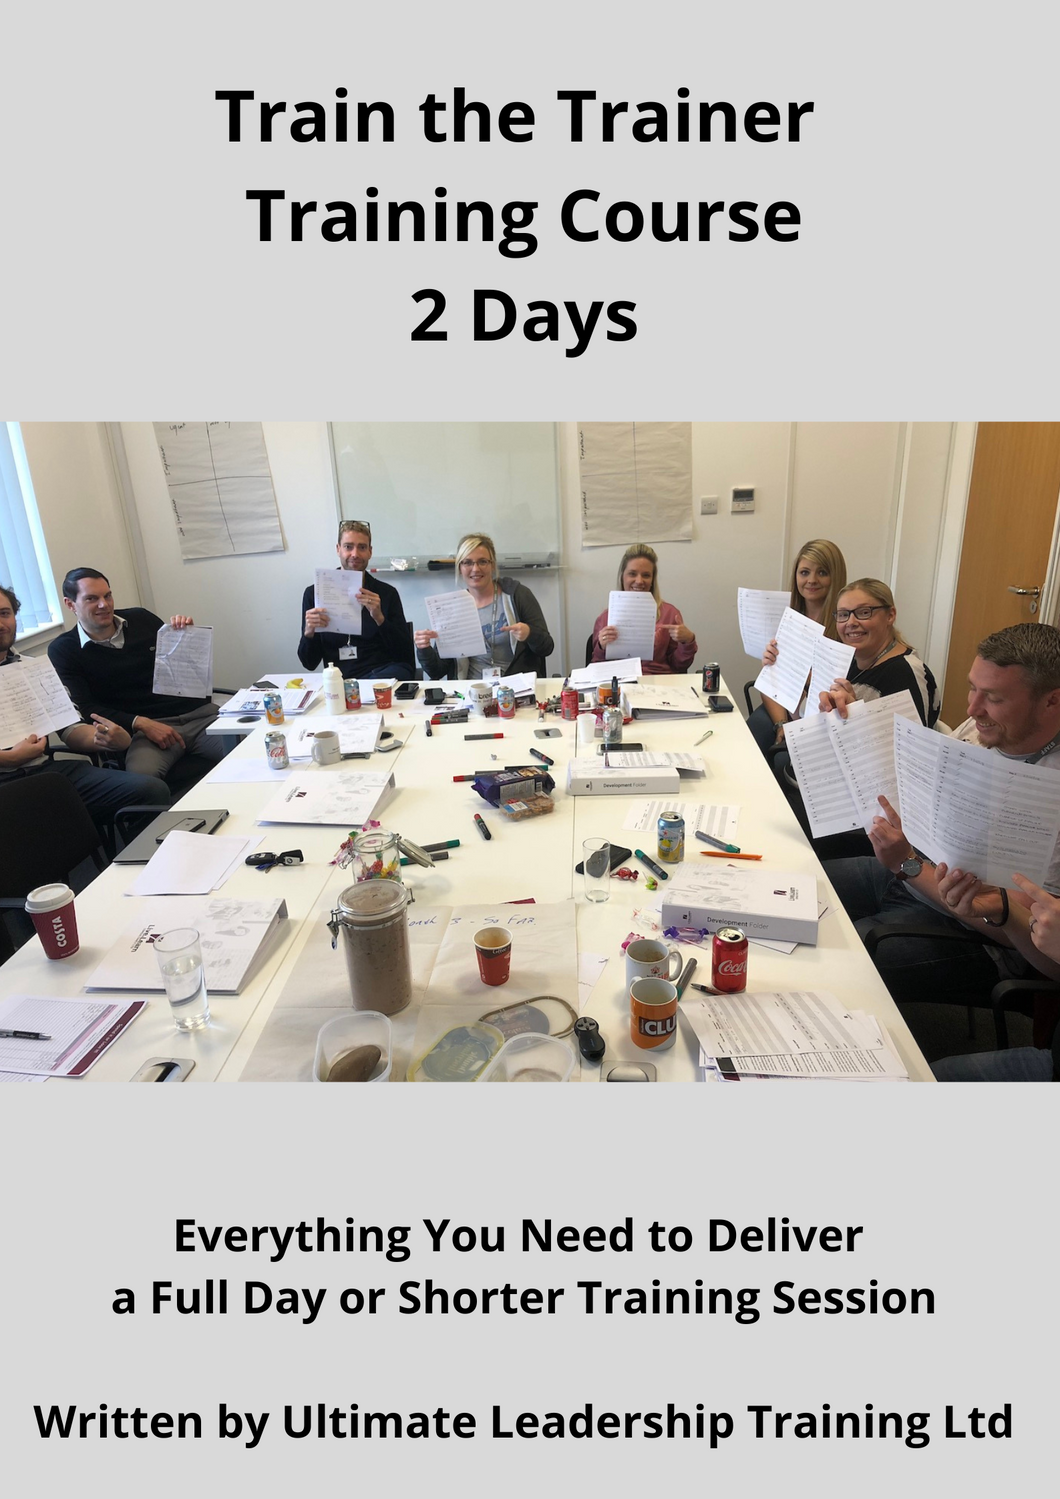 2 Day Train the Trainer Training Course